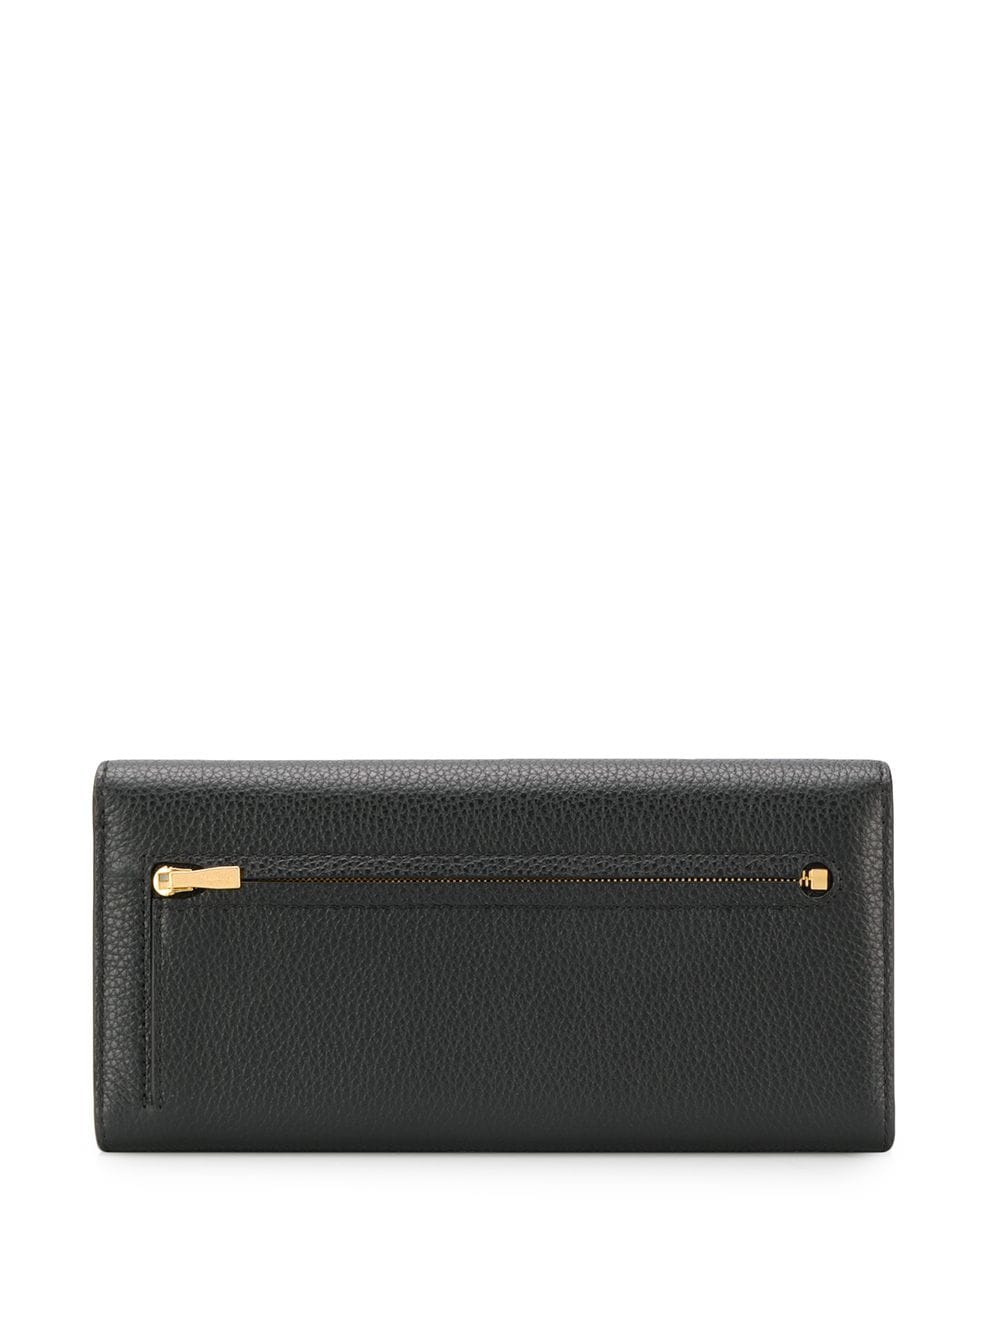 Continental Wallet Charcoal Small Classic Grain